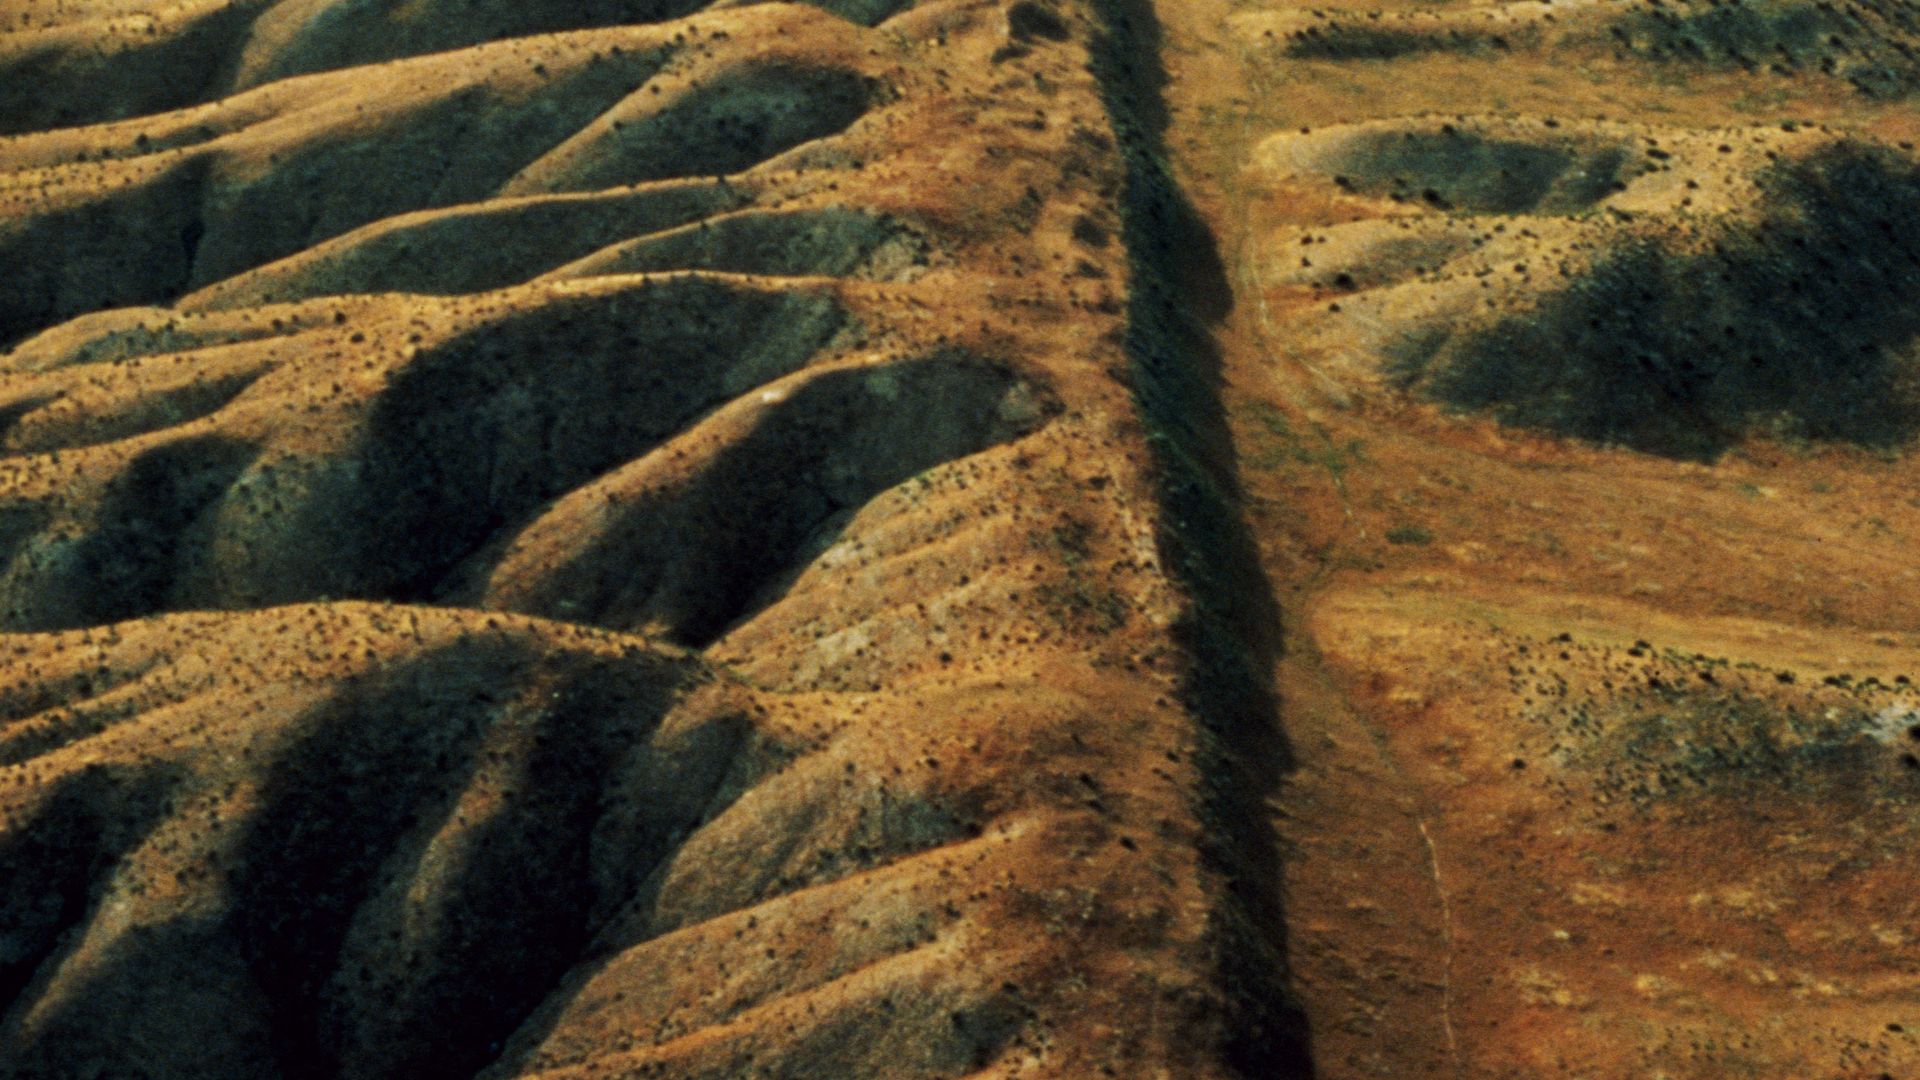 A photo of the San Andreas fault.